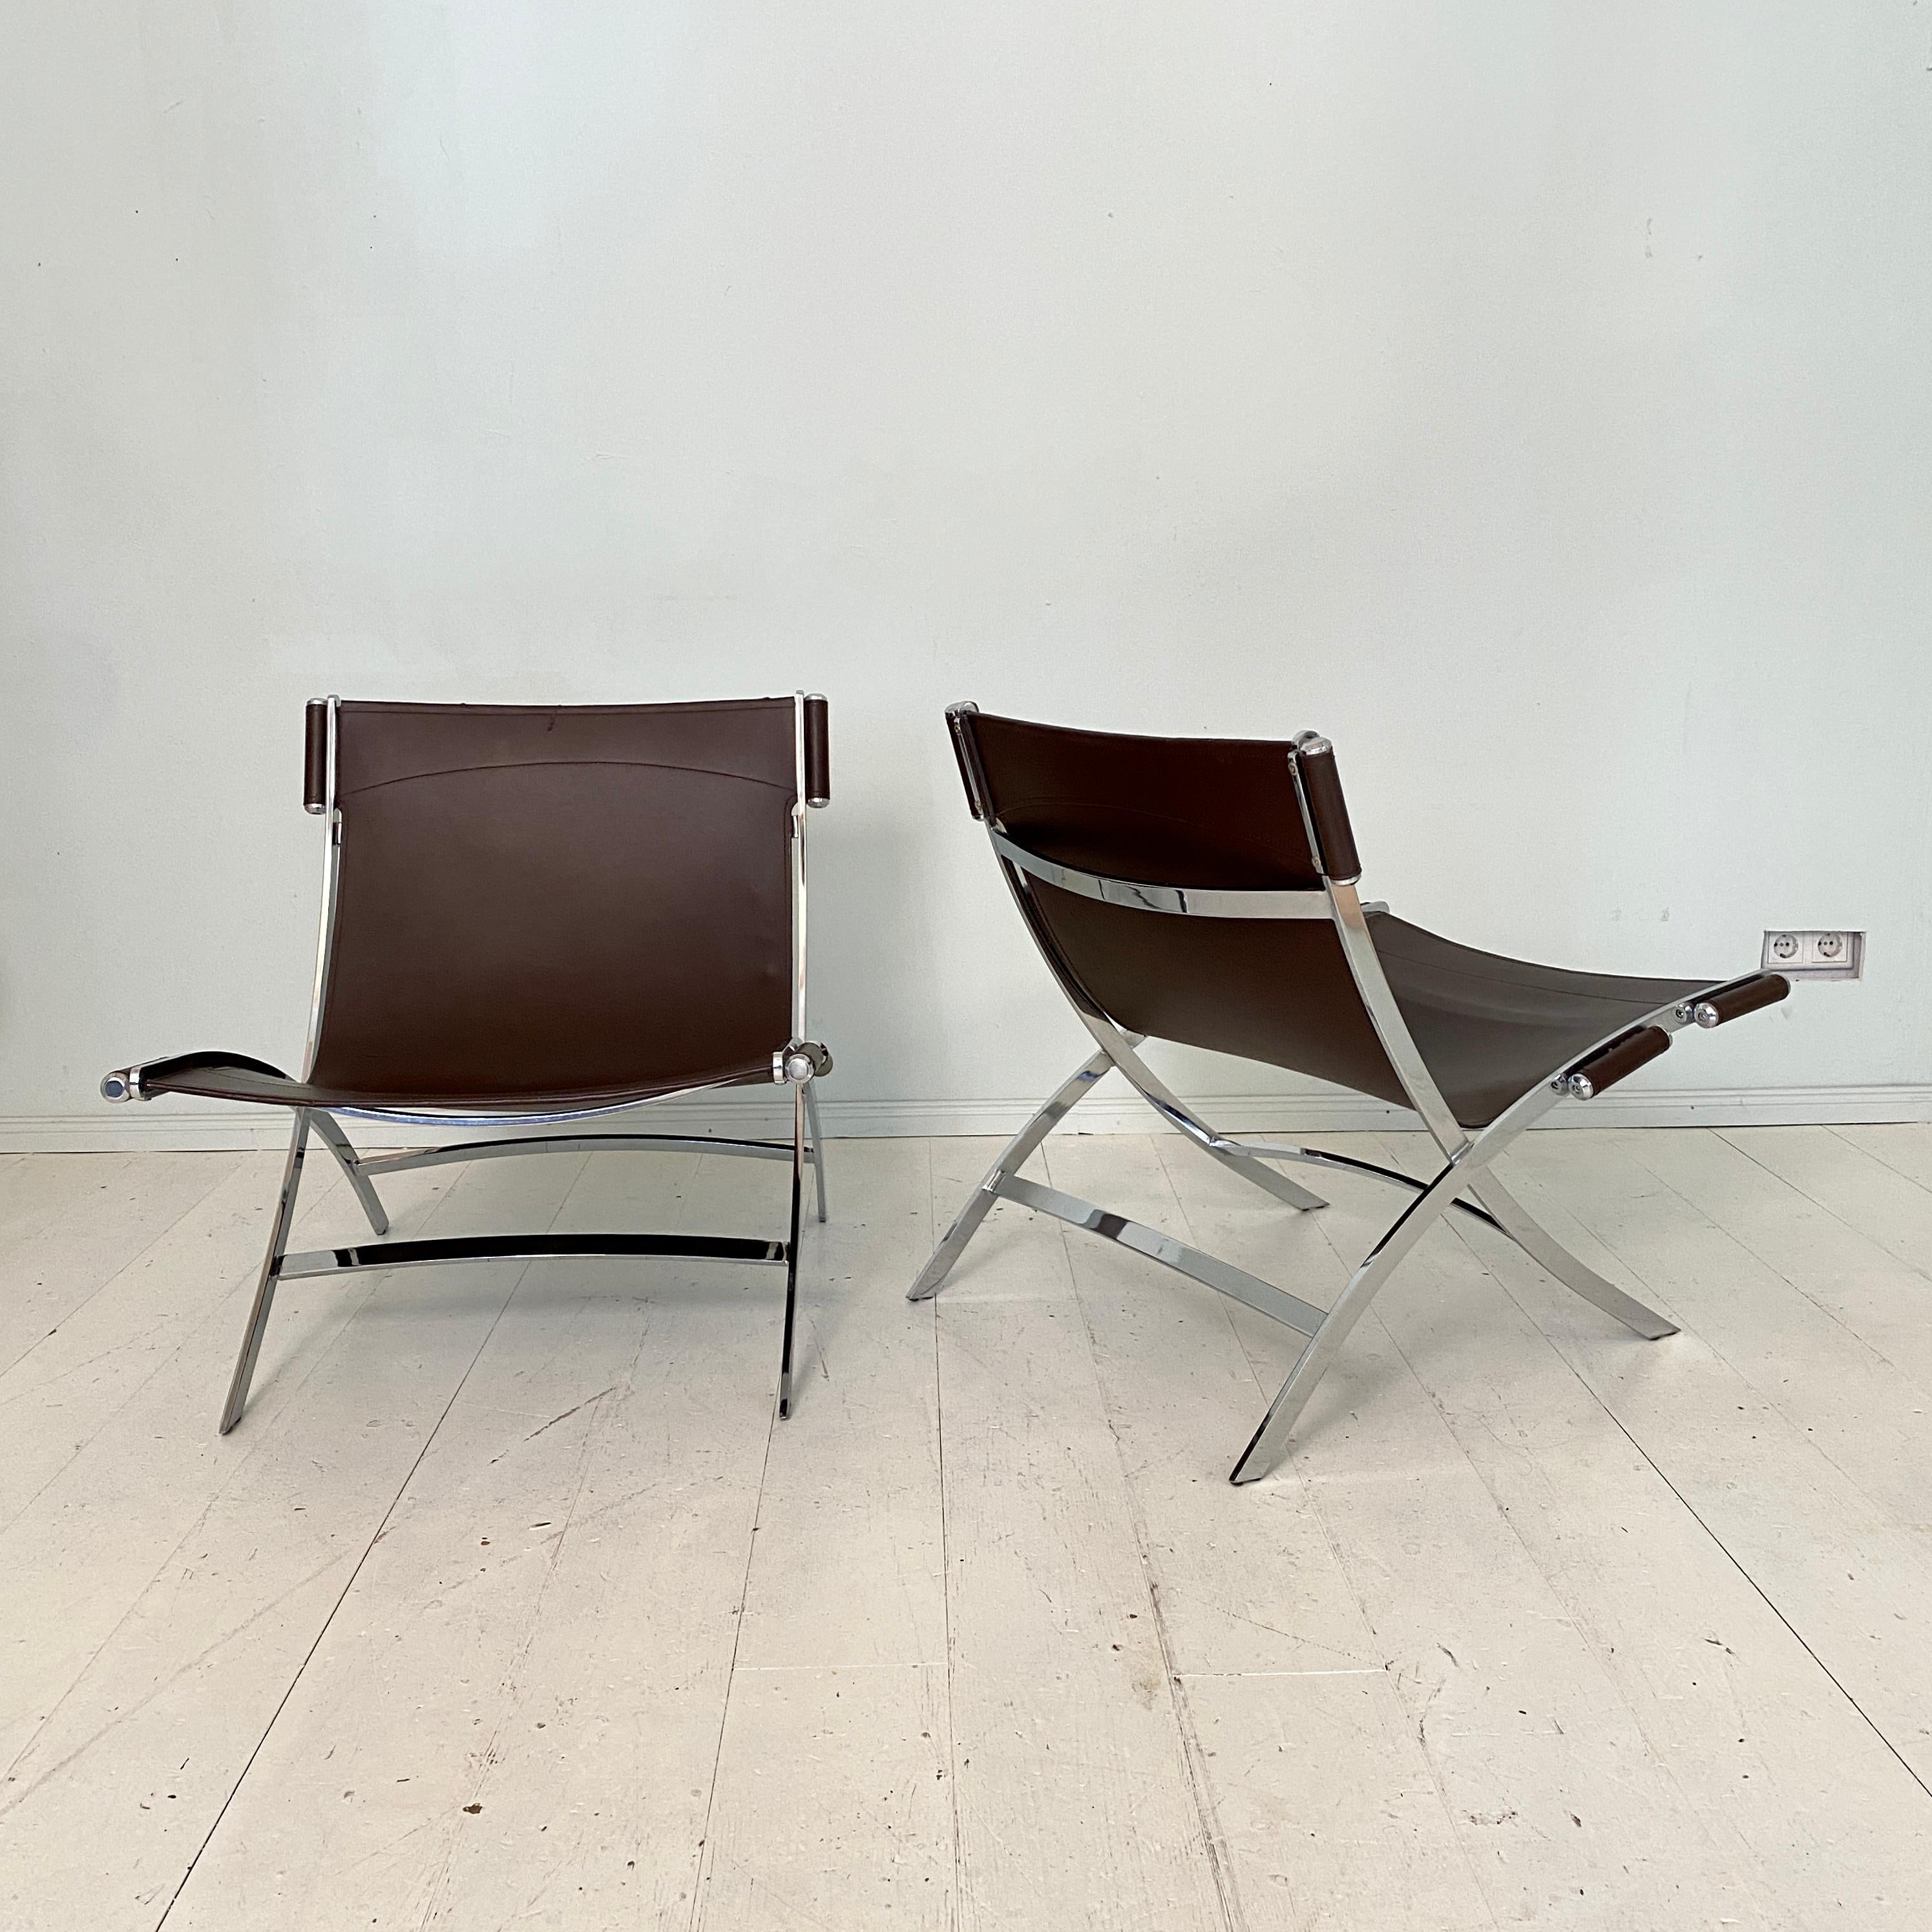 Pair of Lounge Chairs by Antonio Citterio in Chrome and Leather for Flexform 11